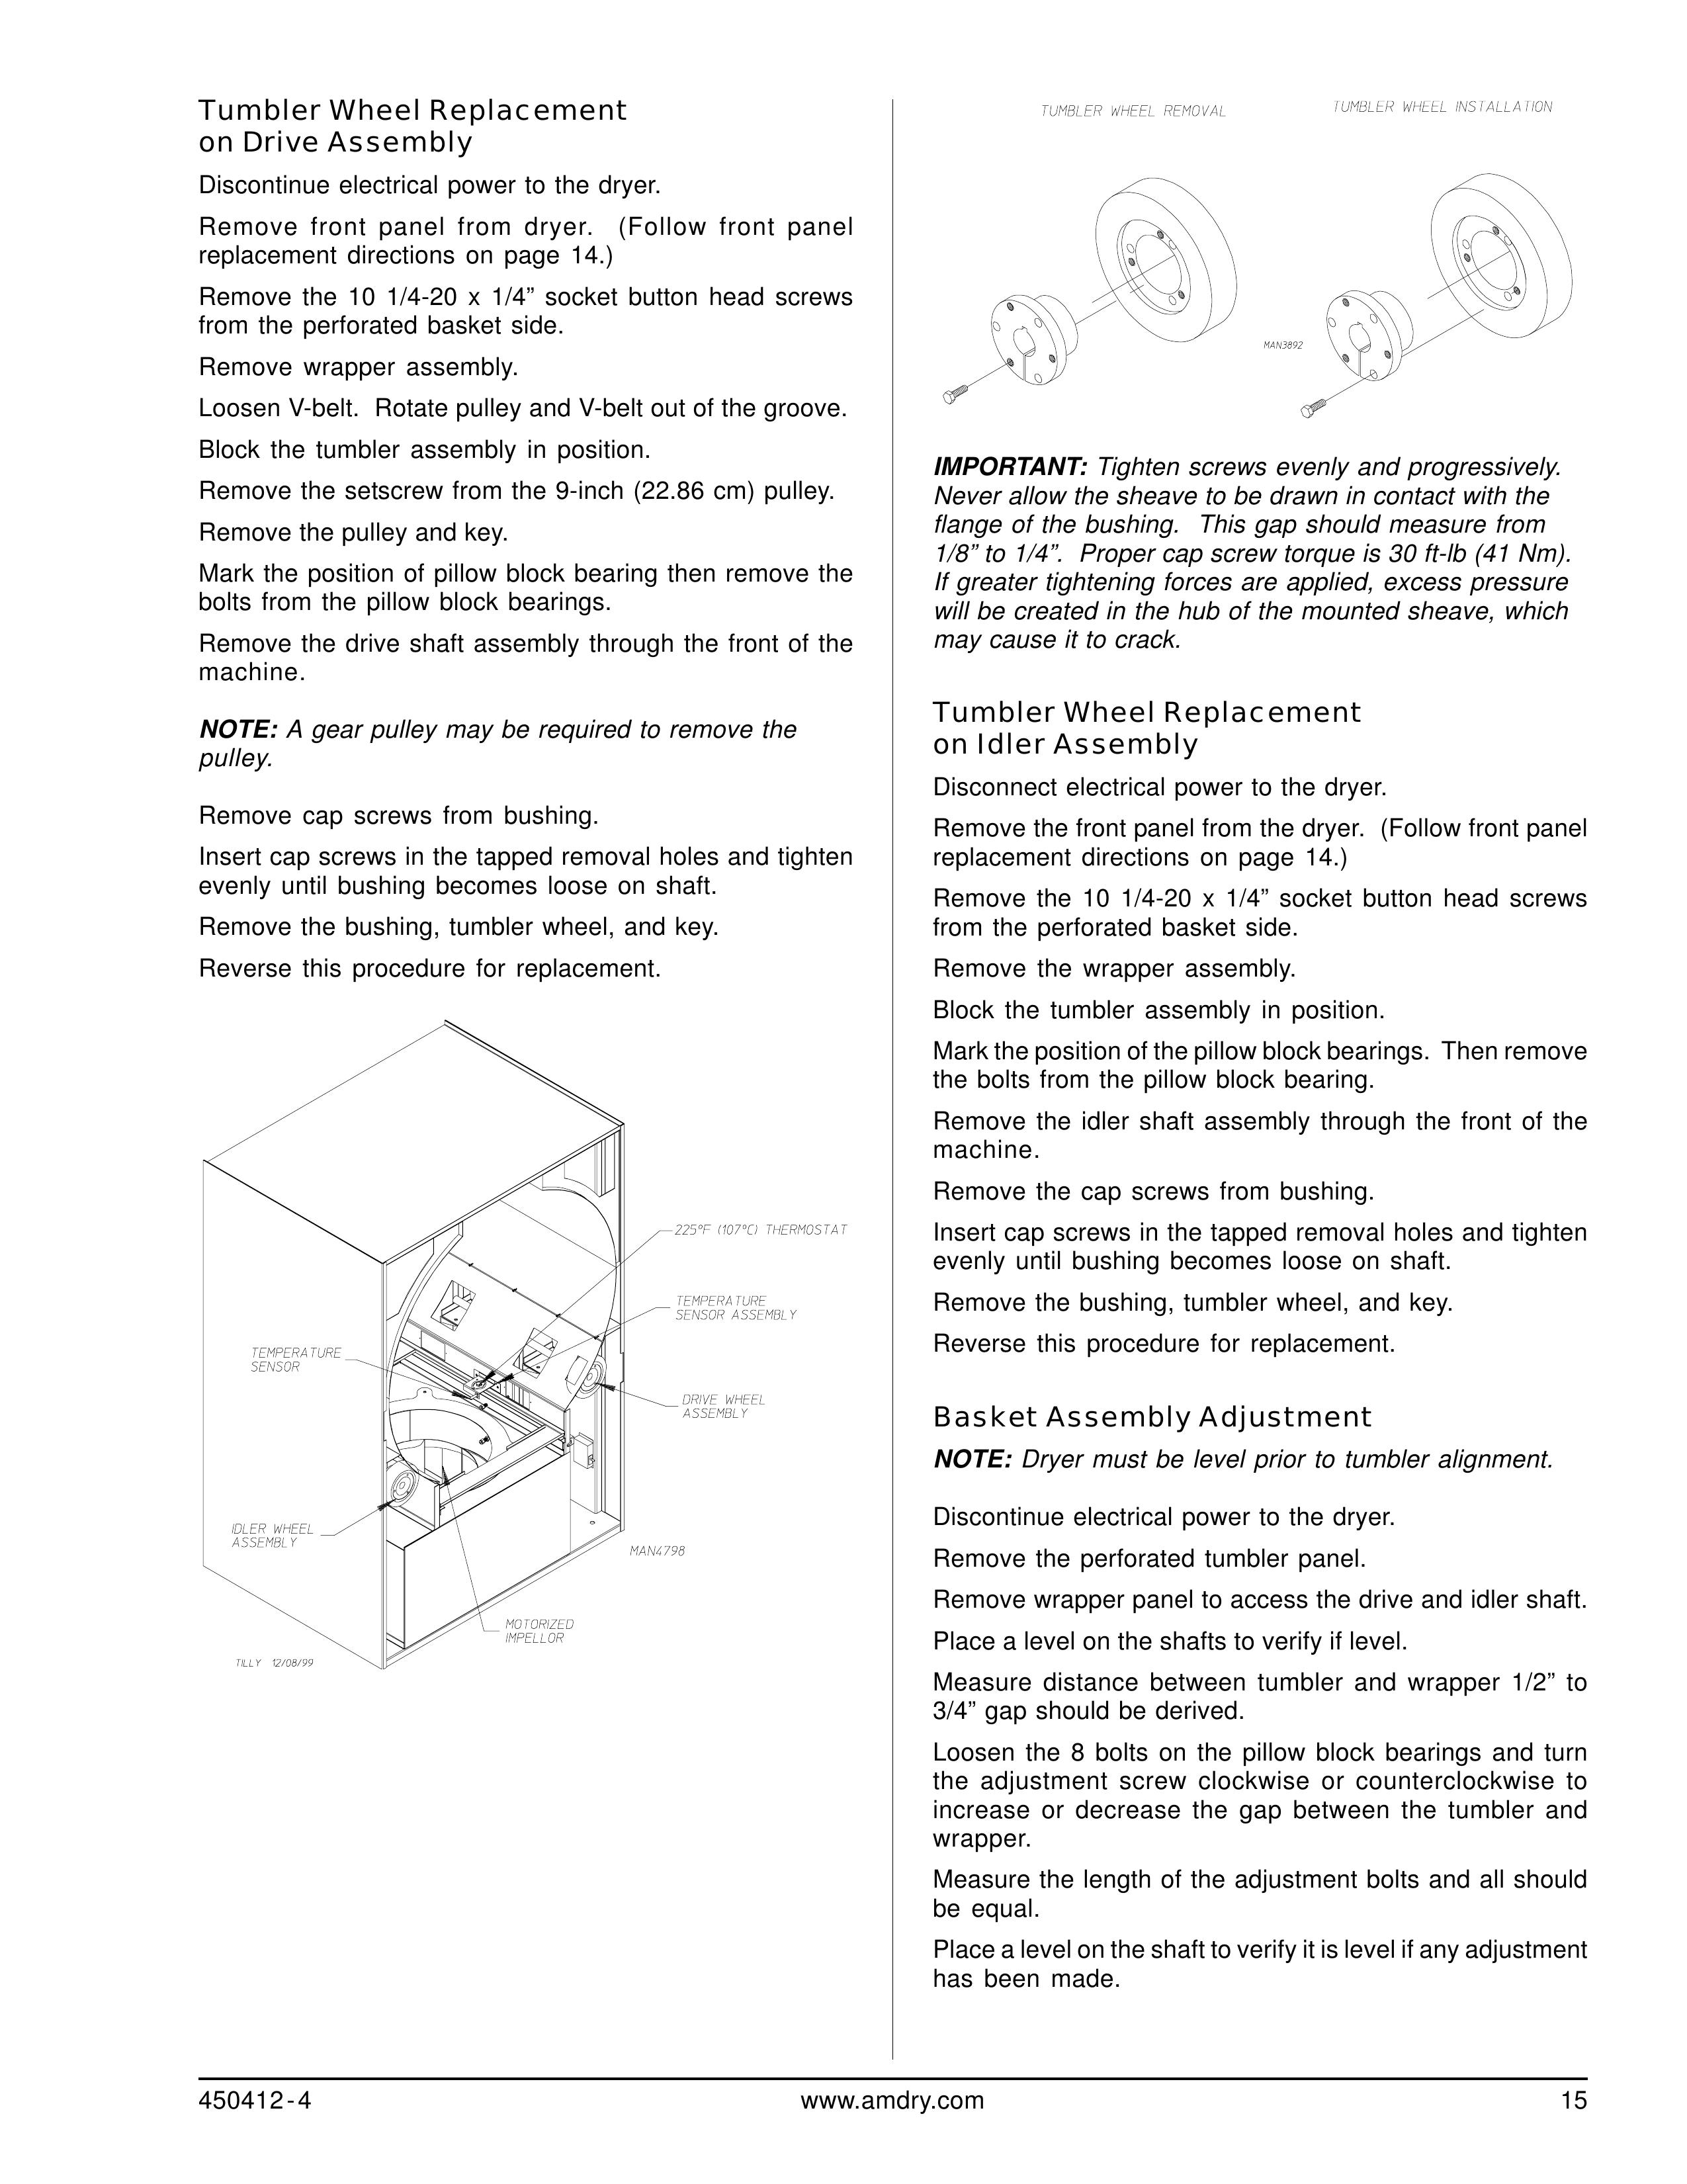 ADC ML-122 Clothes Dryer User Manual (Page 15)